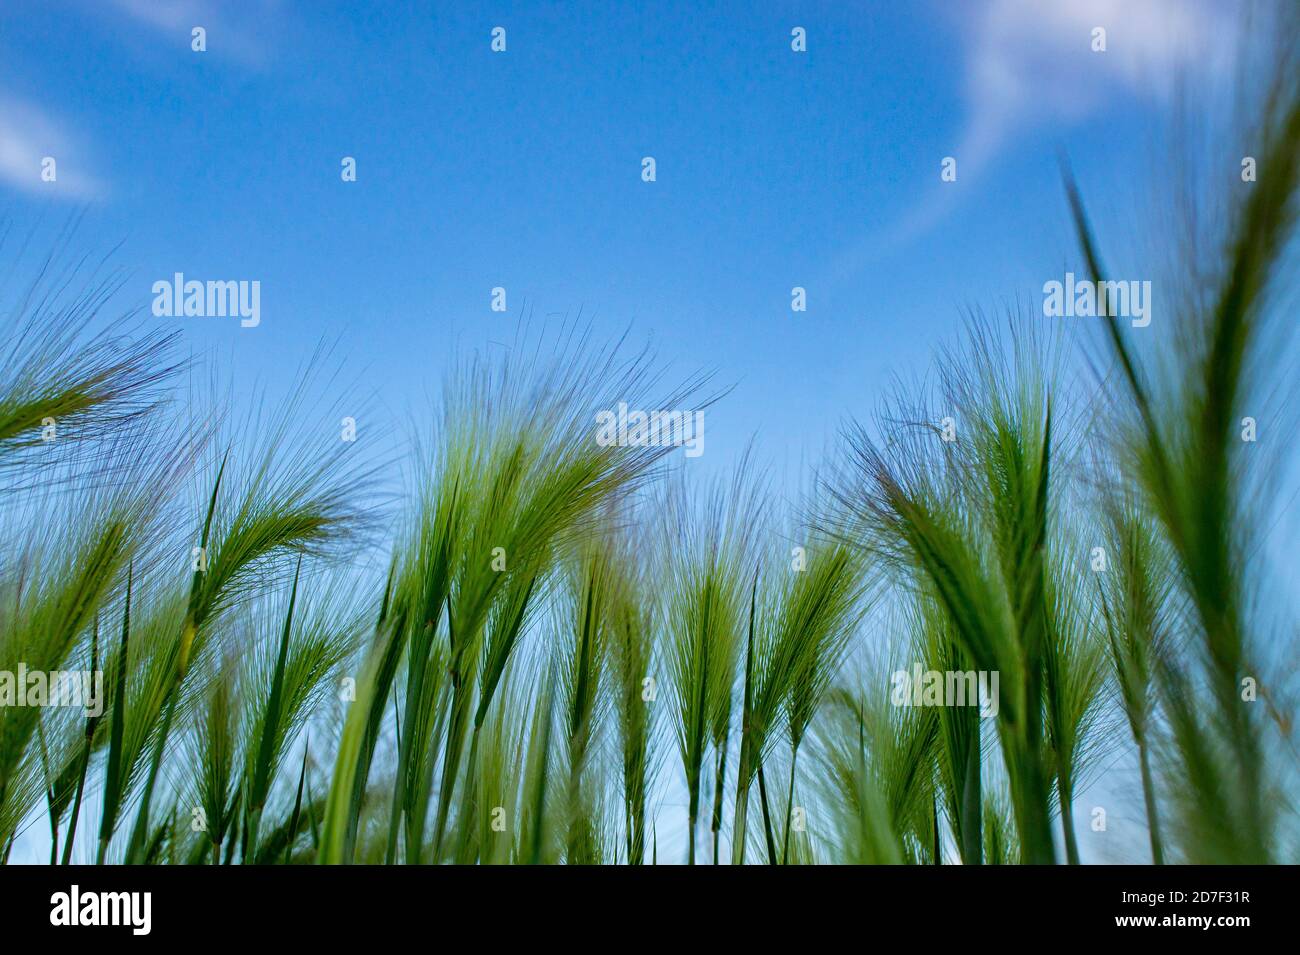 Background of fluffy spikes of green barley close-up. Blue sky and barley grass. Selective focus. Hordeum jubatum, Foxtail barley Stock Photo